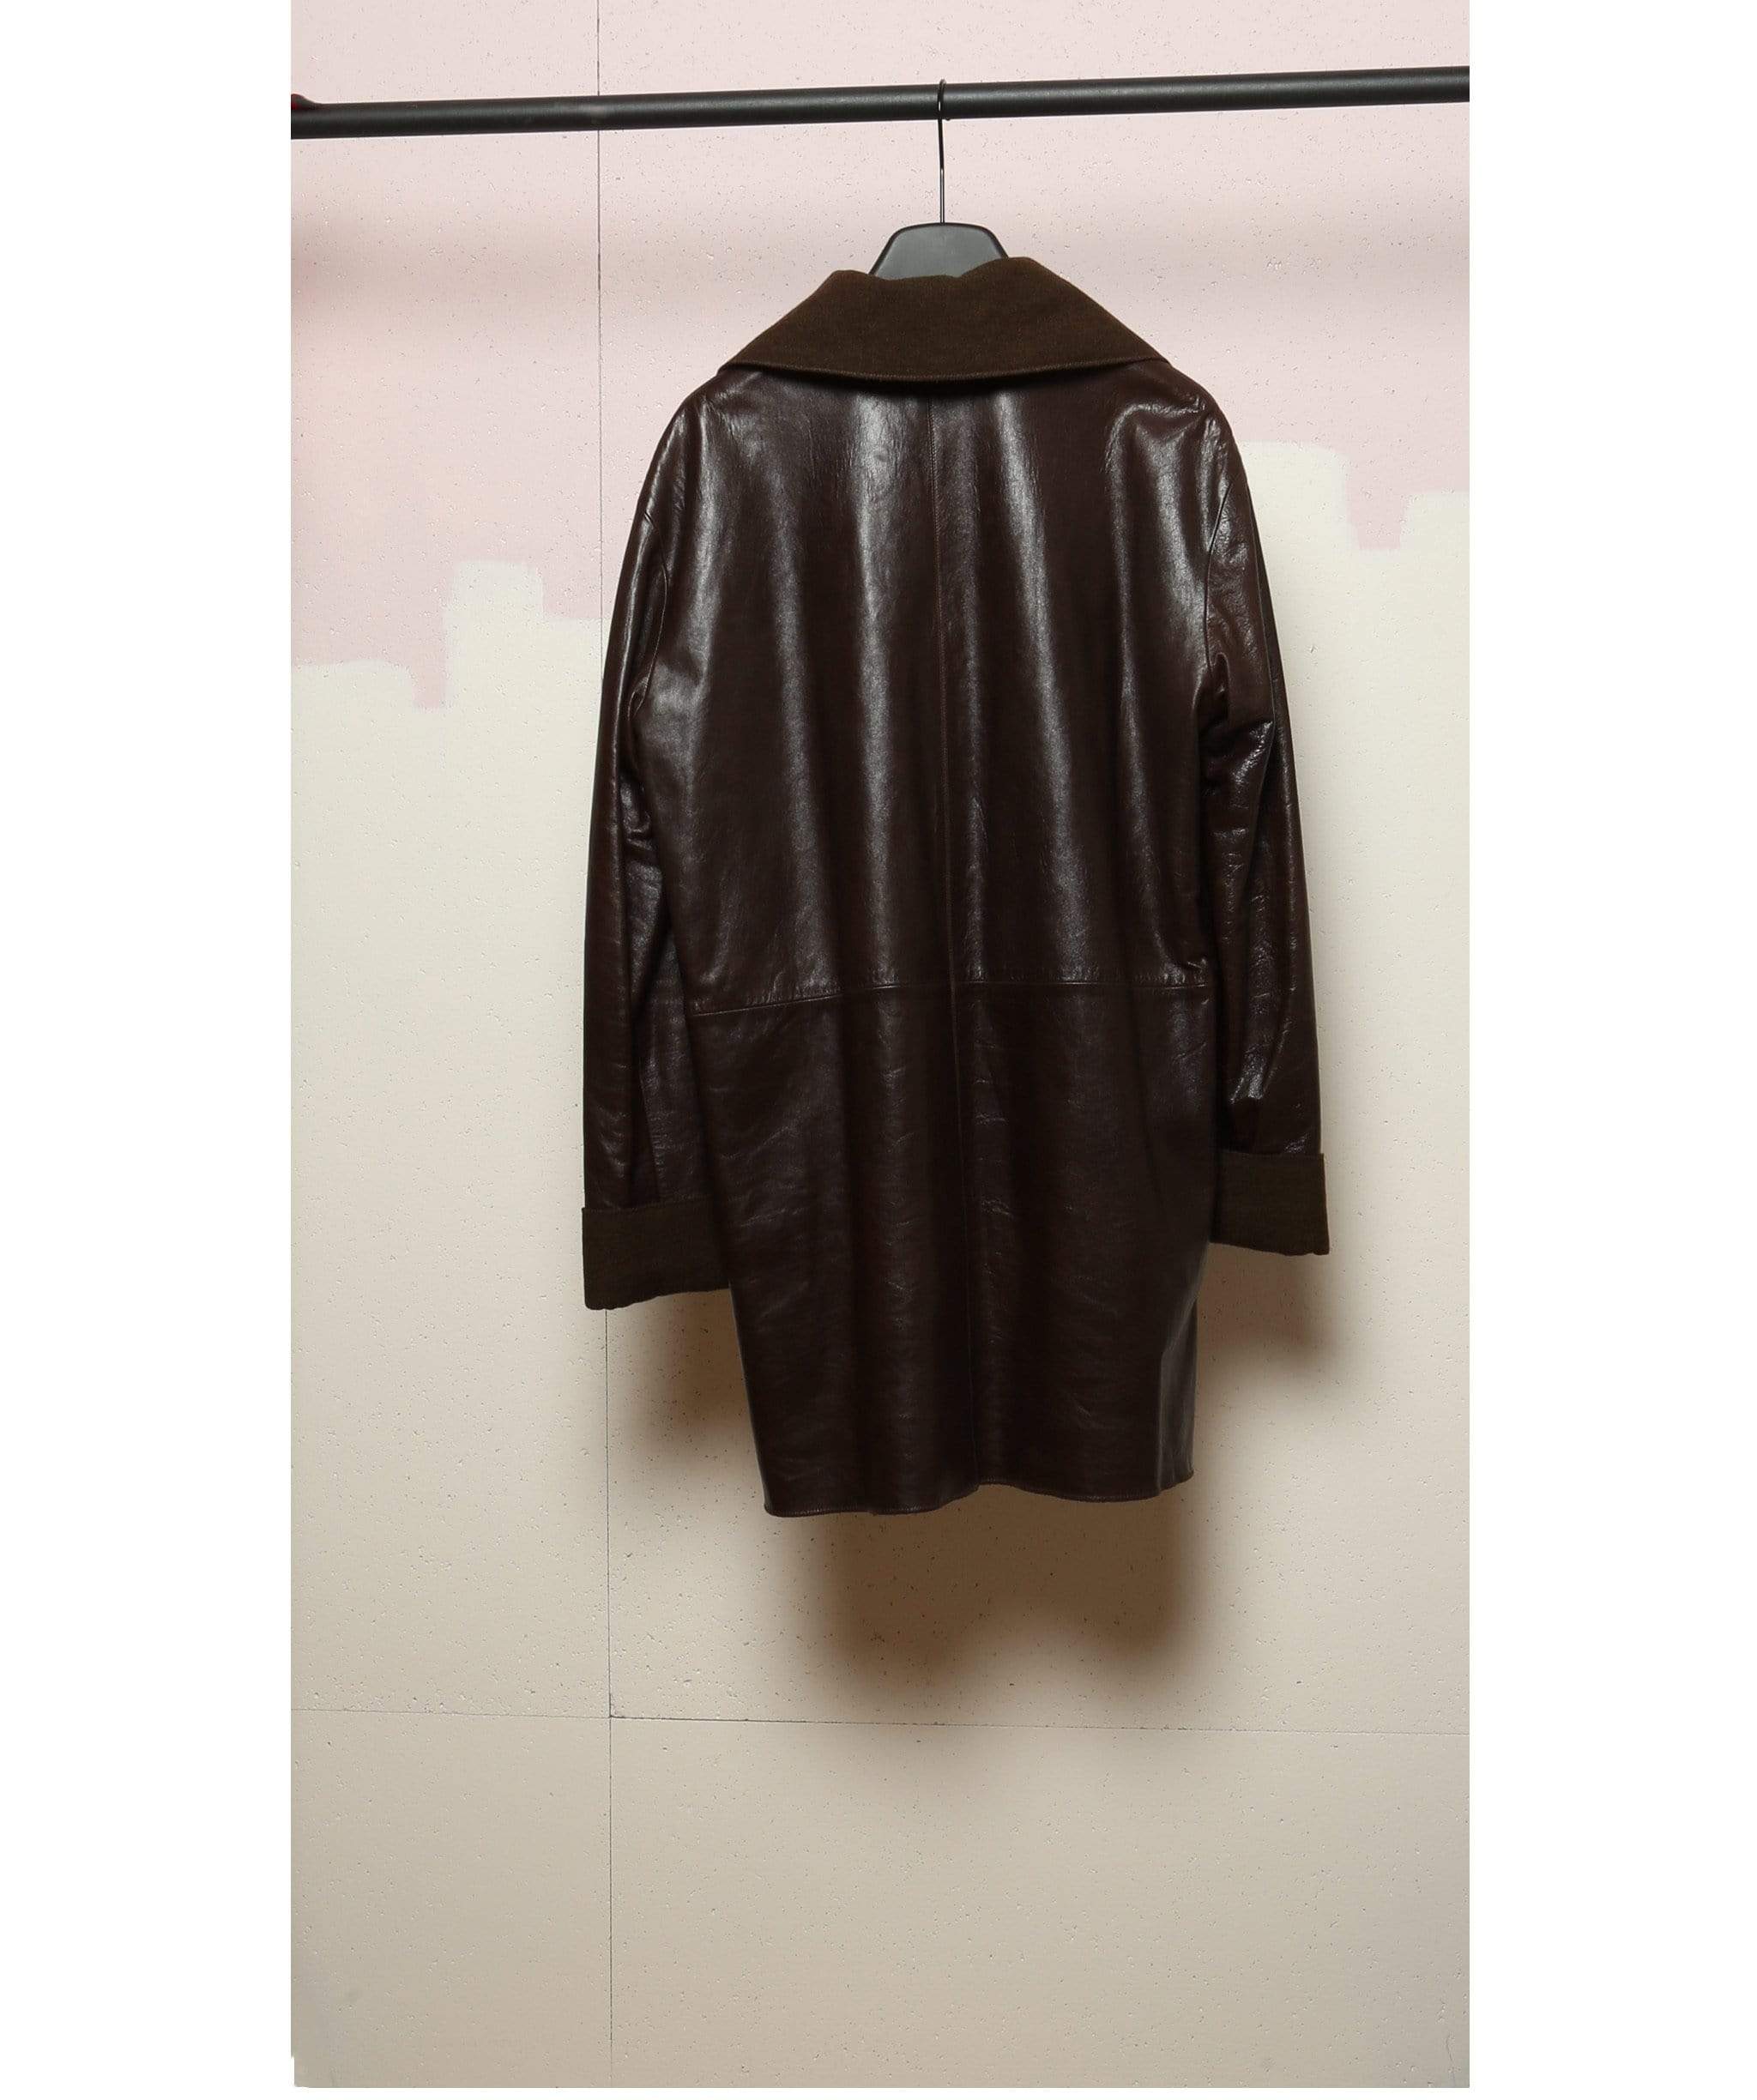 Chanel Chanel Brown leather jacket size 8